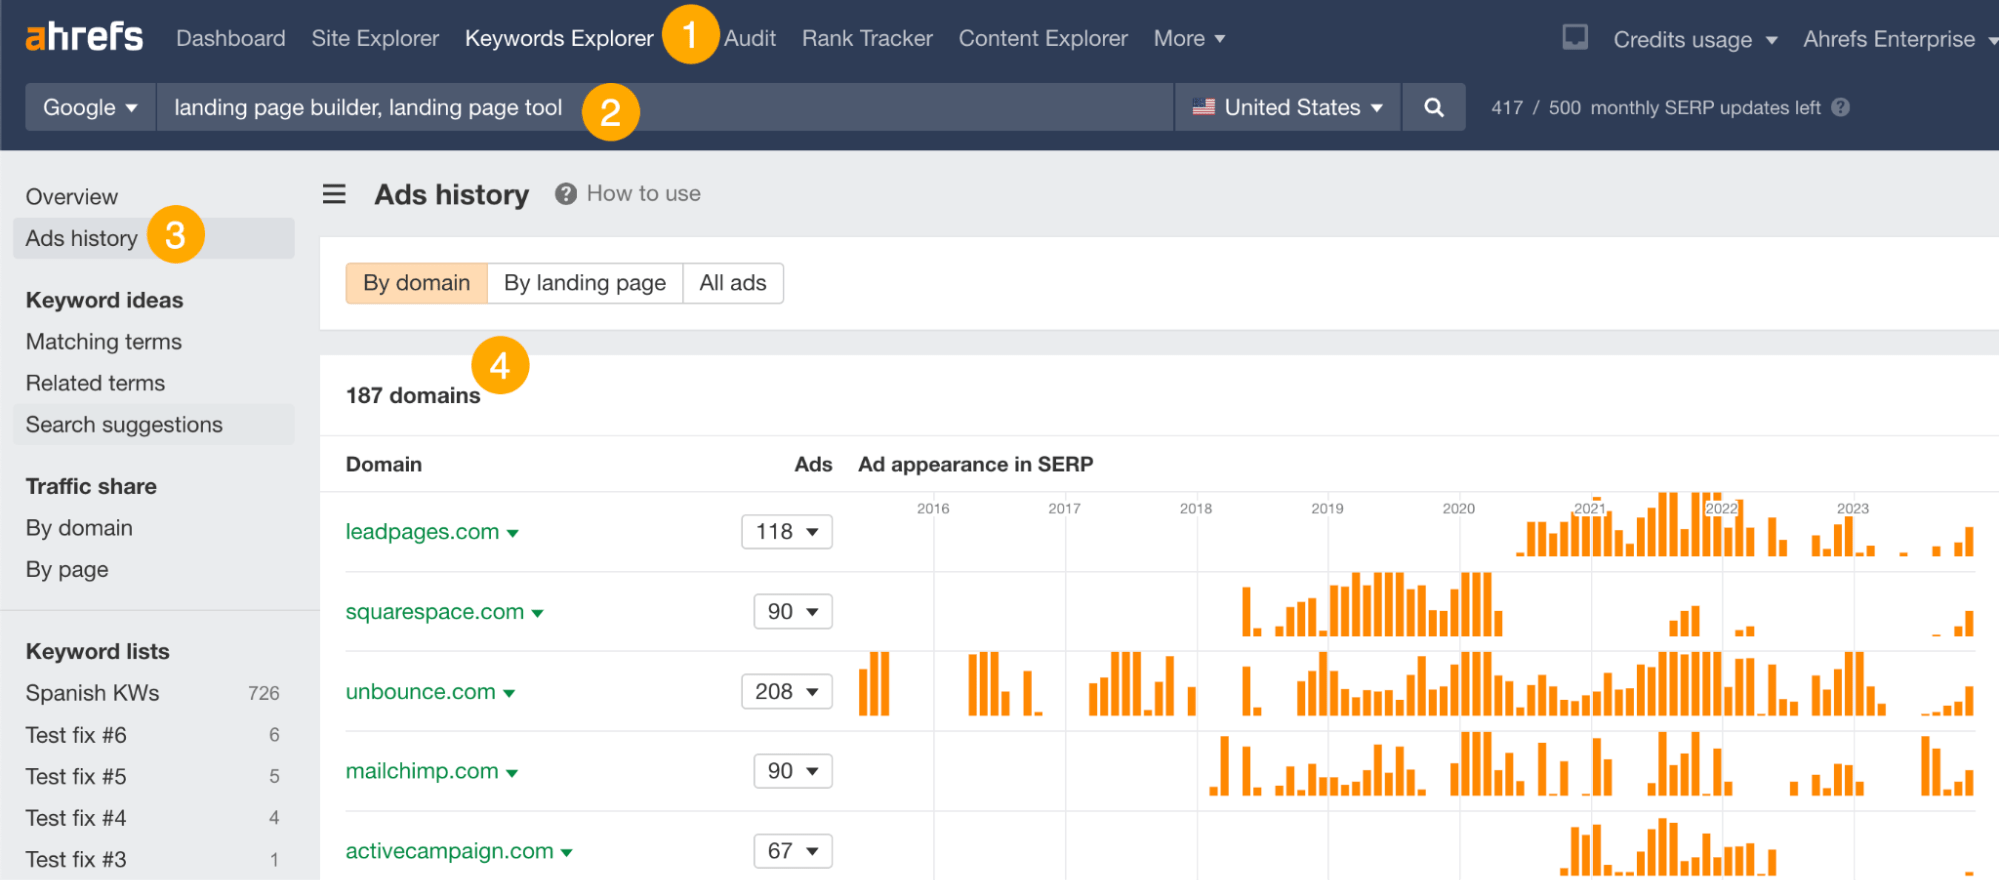 Ads history report in Ahrefs' Keywords Explorer.